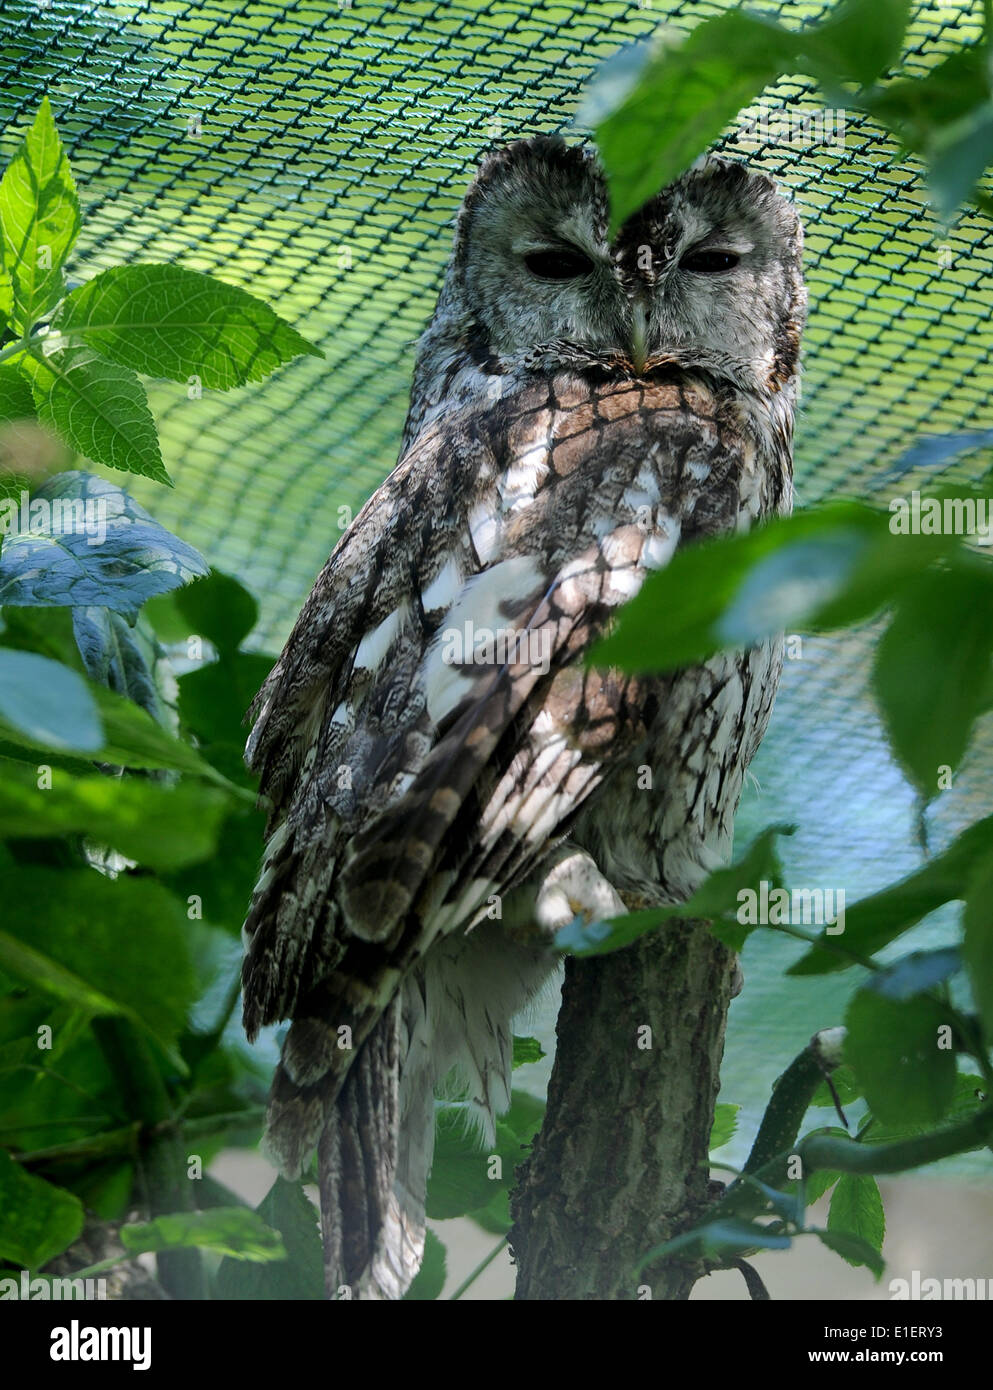 Rastede, Germany. 30th May, 2014. A Tawny owl (Strix aluco) sits in its aviary at the wildlife rescue centre in Rastede, Germany, 30 May 2014. Spring is a very busy time for the wildlife rescue centre which prepares the wild animals to be re-released into the wild. Photo: Ingo Wagner/dpa/Alamy Live News Stock Photo